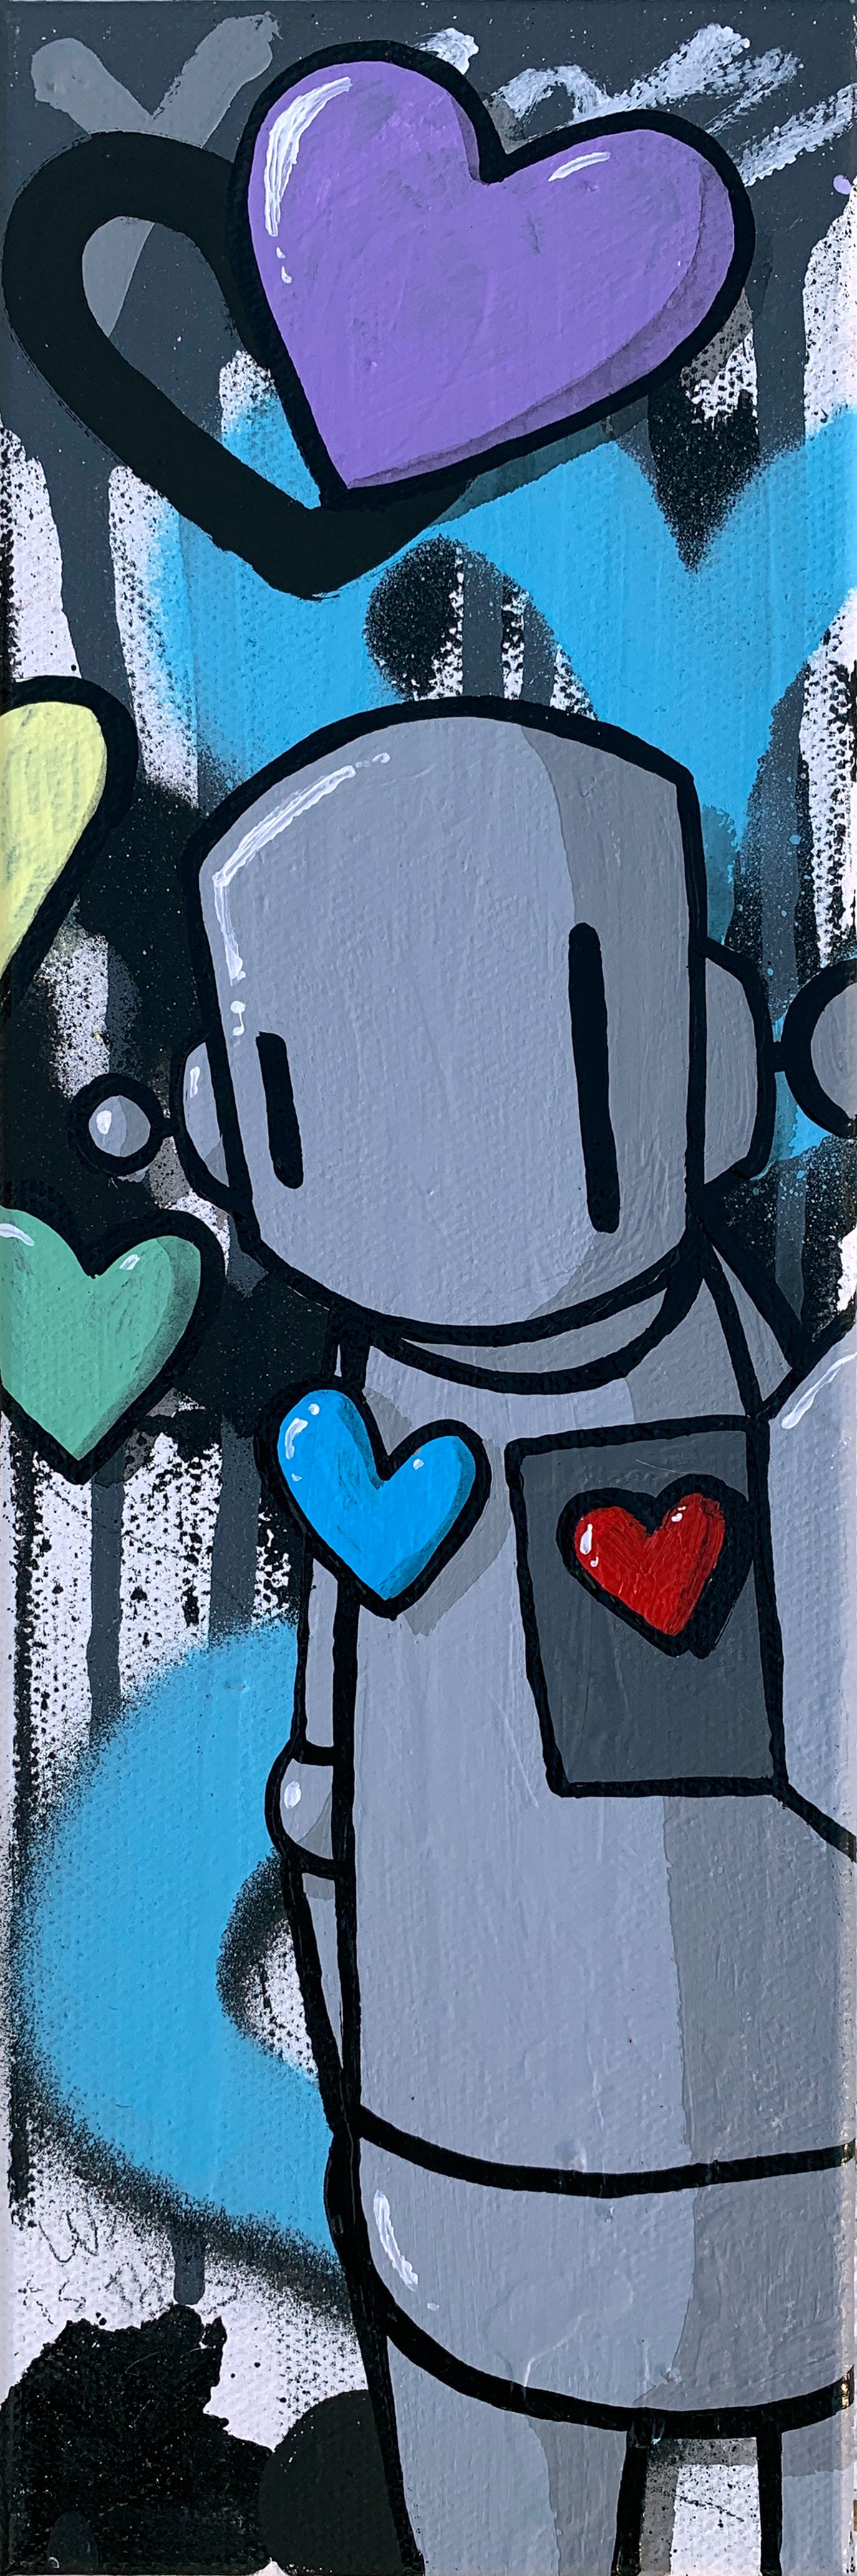 A close-up mixed media painting of a robot and hearts on canvas, 4x12.